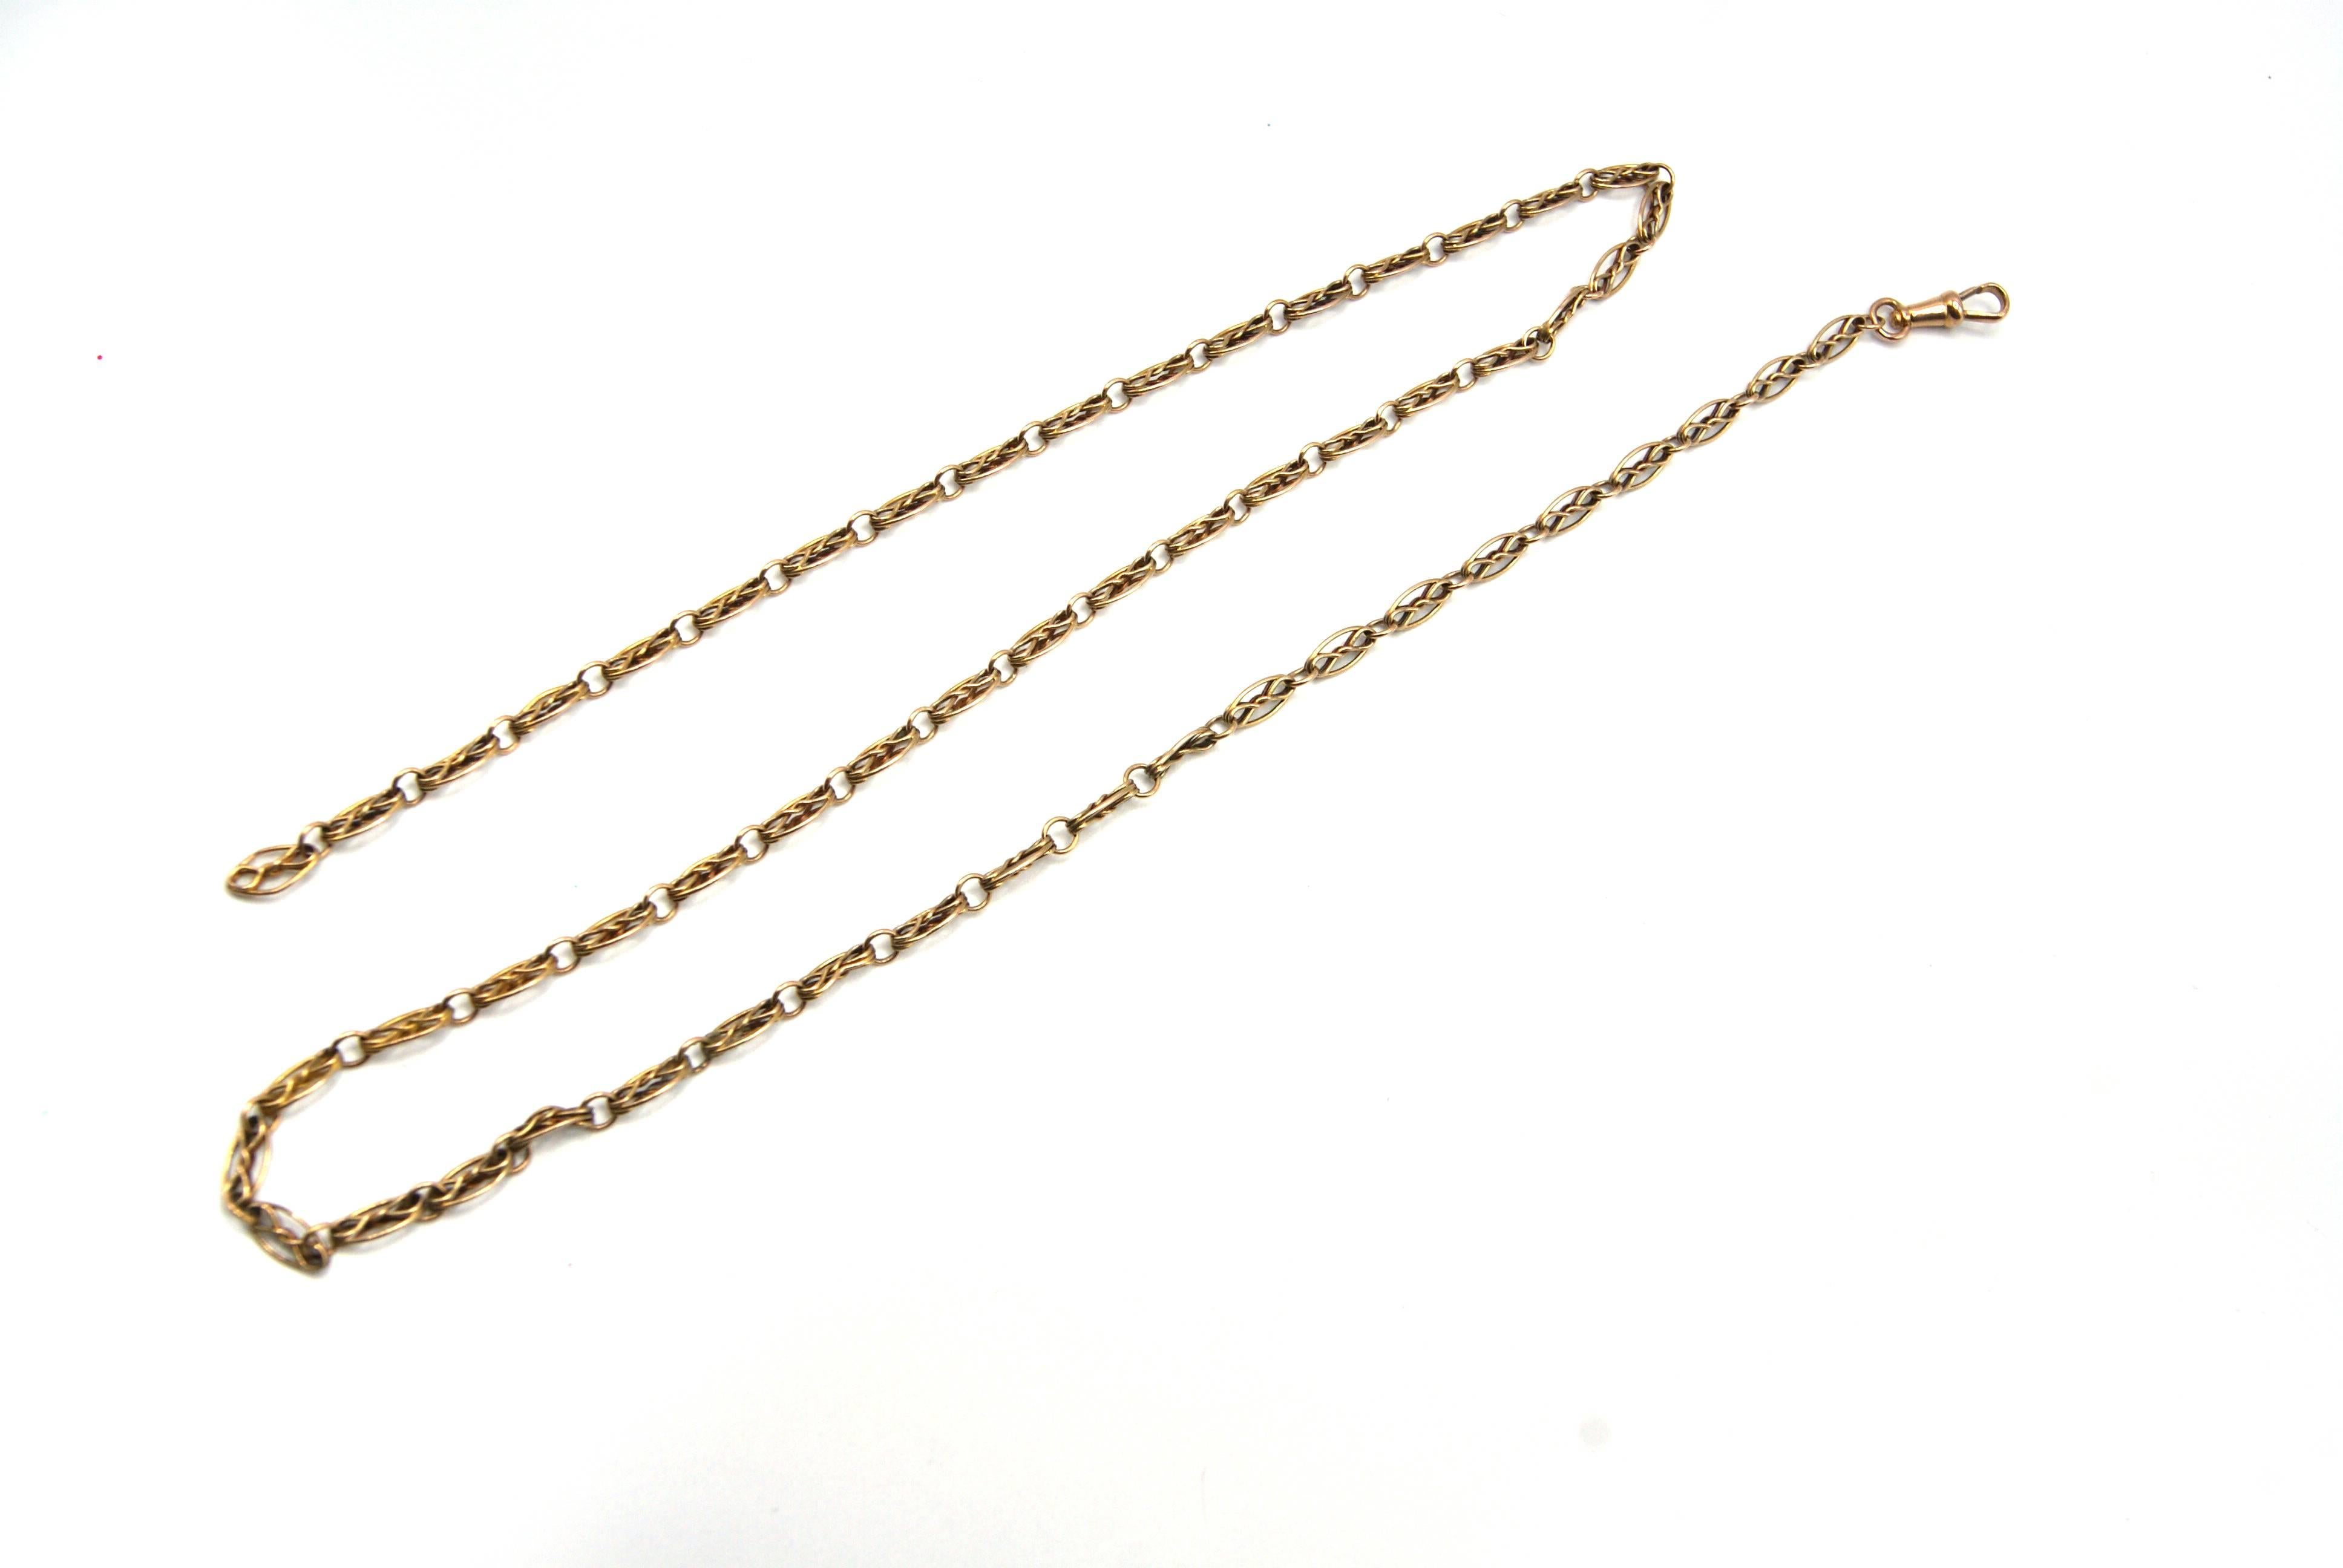 Wonderfully designed and handcrafted, this French 18 karat yellow gold long chain necklace, which has charmed the necks two centuries ago, is a beautiful wear for every occasion. The interlocking pretzel design links flow flexibly along this chain